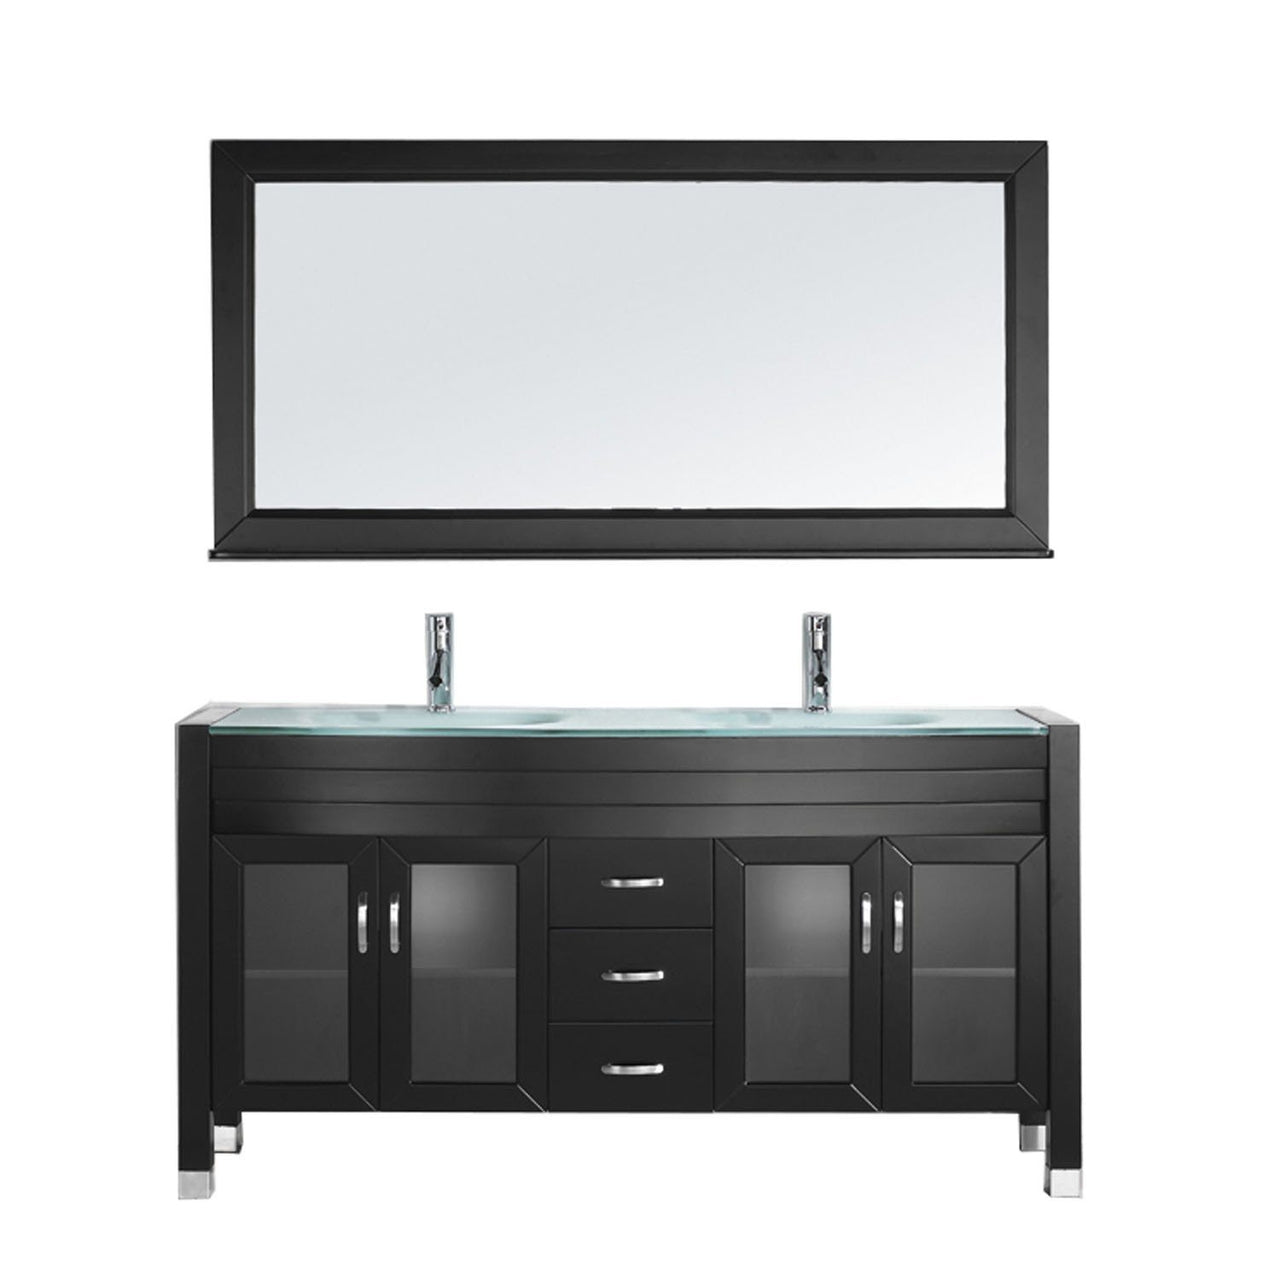 Virtu USA Ava 63" Double Round Sink Espresso Top Vanity in Espresso with Polished Chrome Faucet and Mirror Vanity Virtu USA 